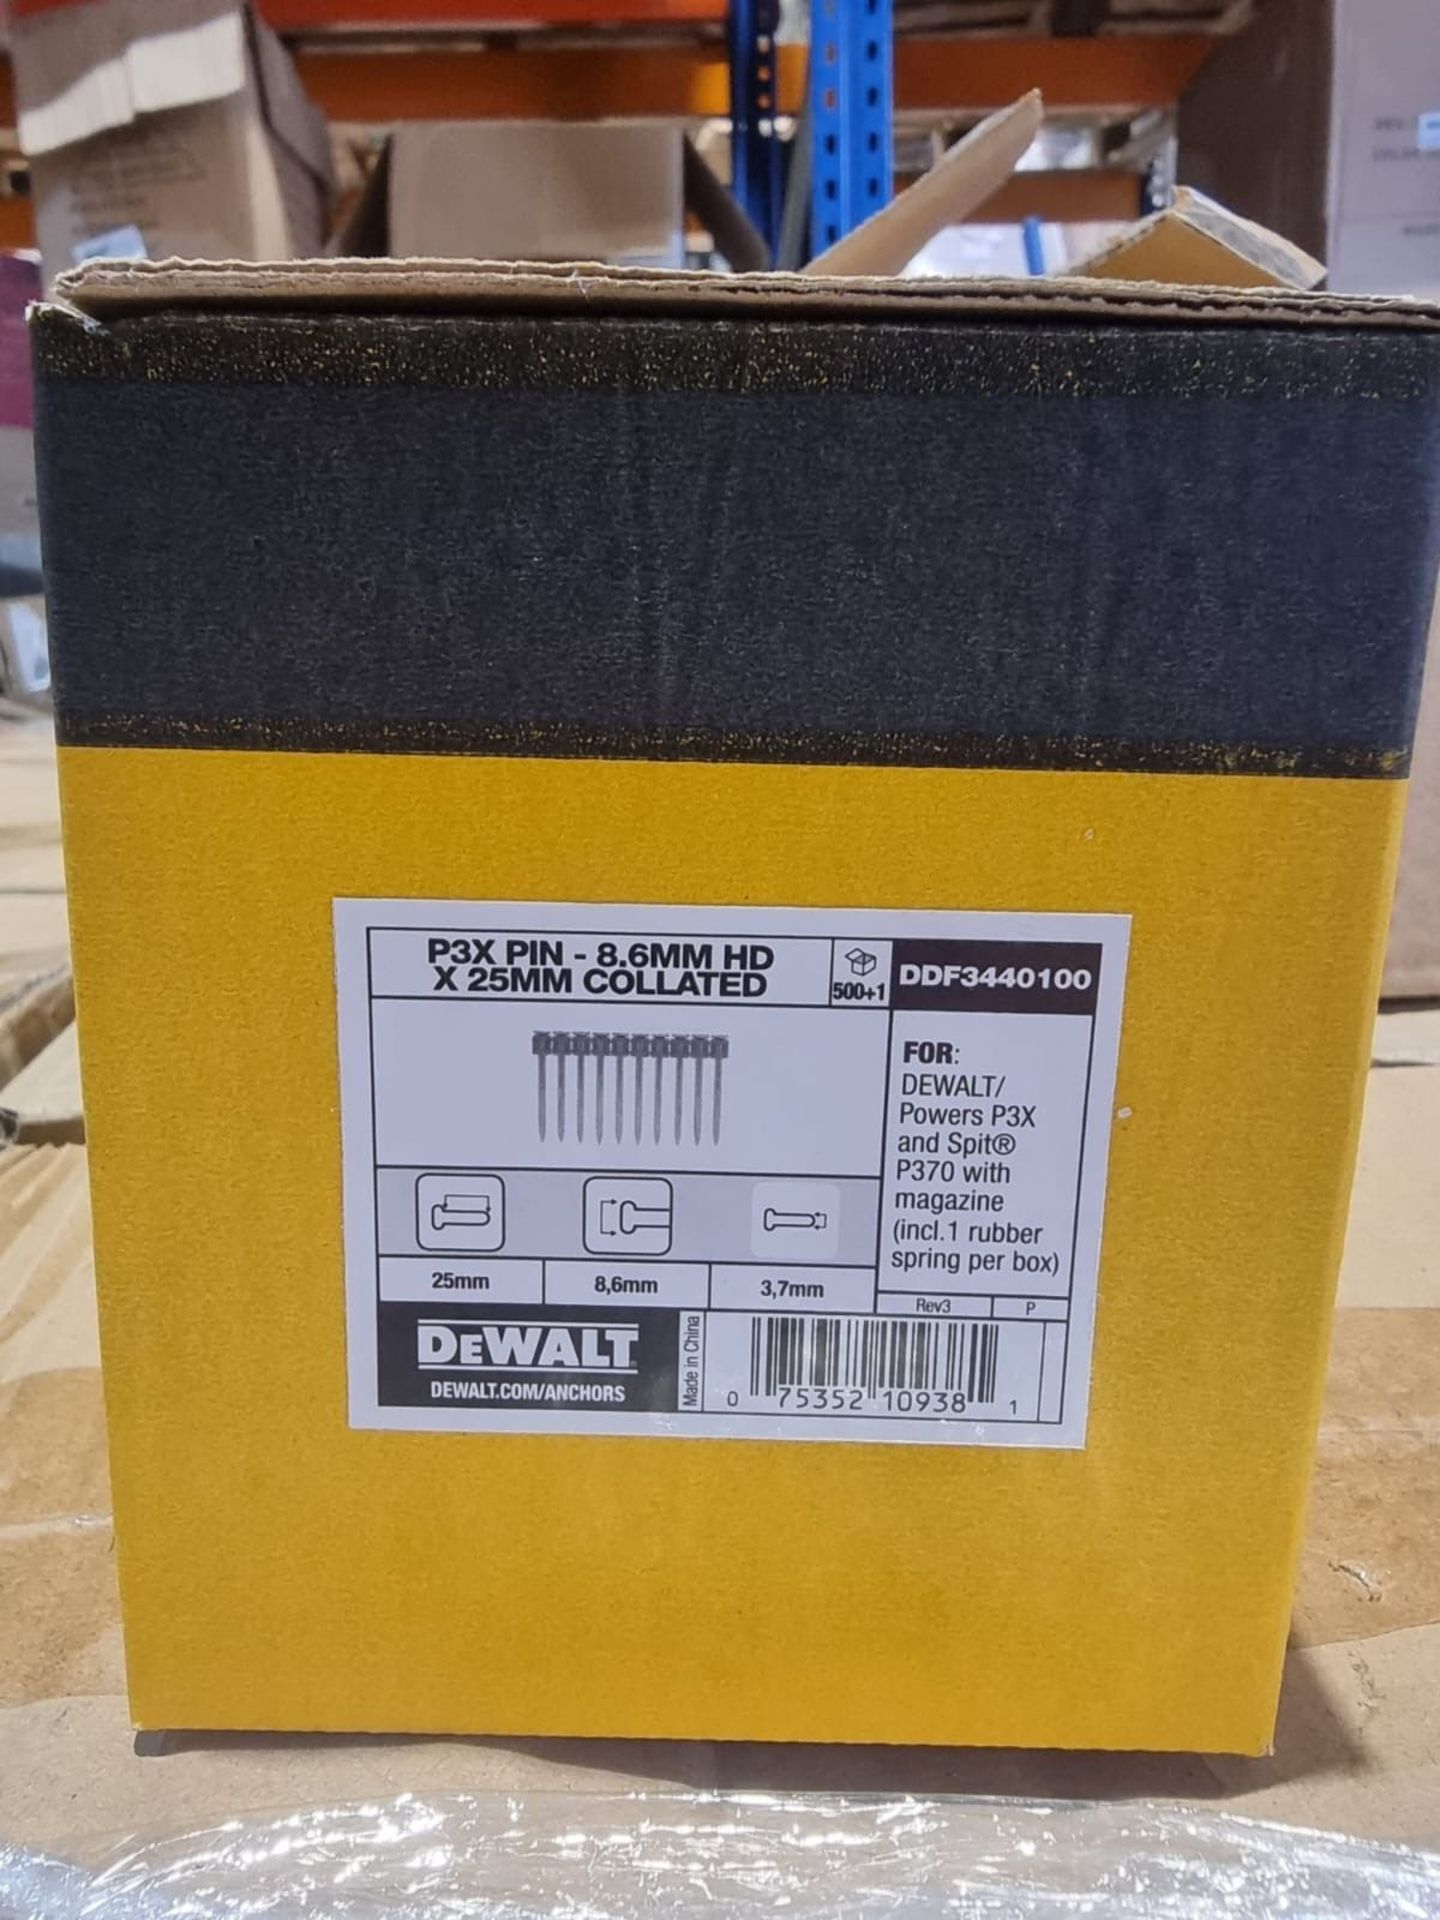 Trade Lot 15 x New Boxes of 500 Dewalt 3.7mm x 25mm HD P3X Pins Collated - DDF3440100. RRP £44.50